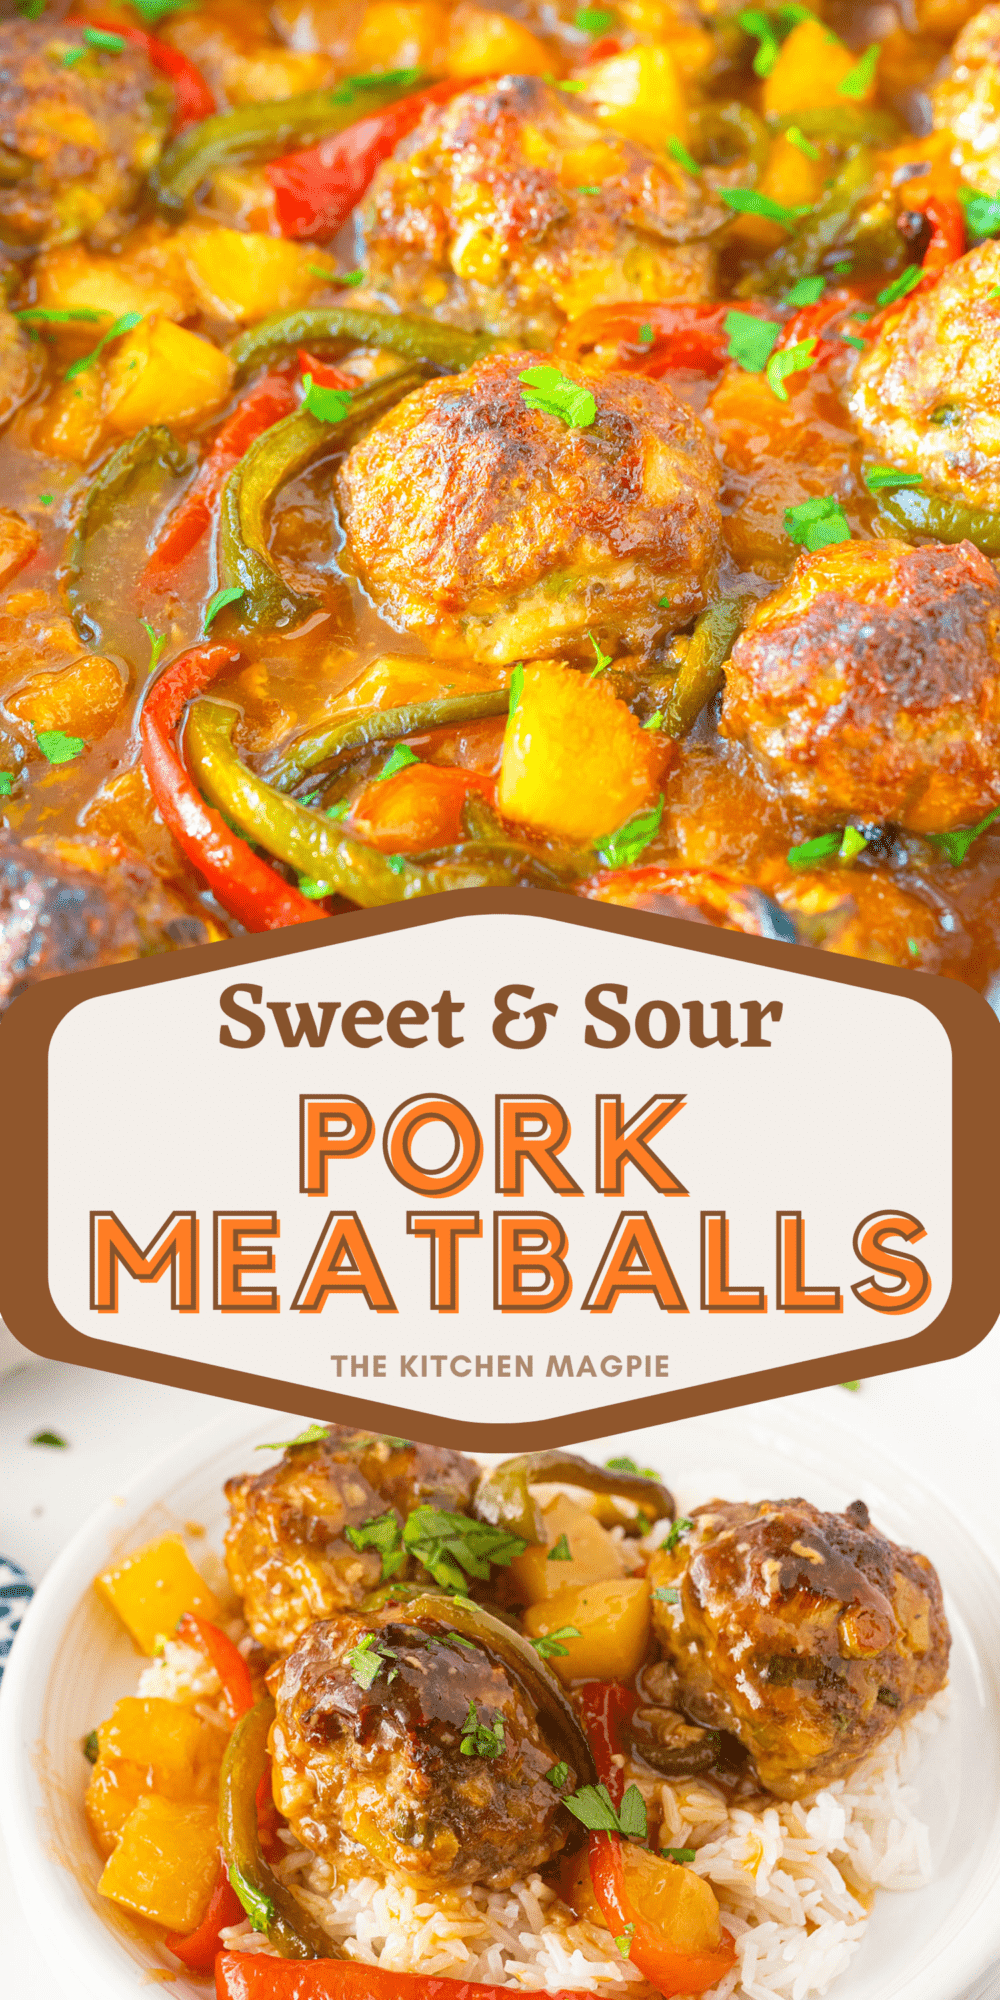 These juicy pork meatballs are loaded up with minced green onions and water chestnuts, spiced with ginger and soy and then cooked up in a pineapple sweet and sour sauce!